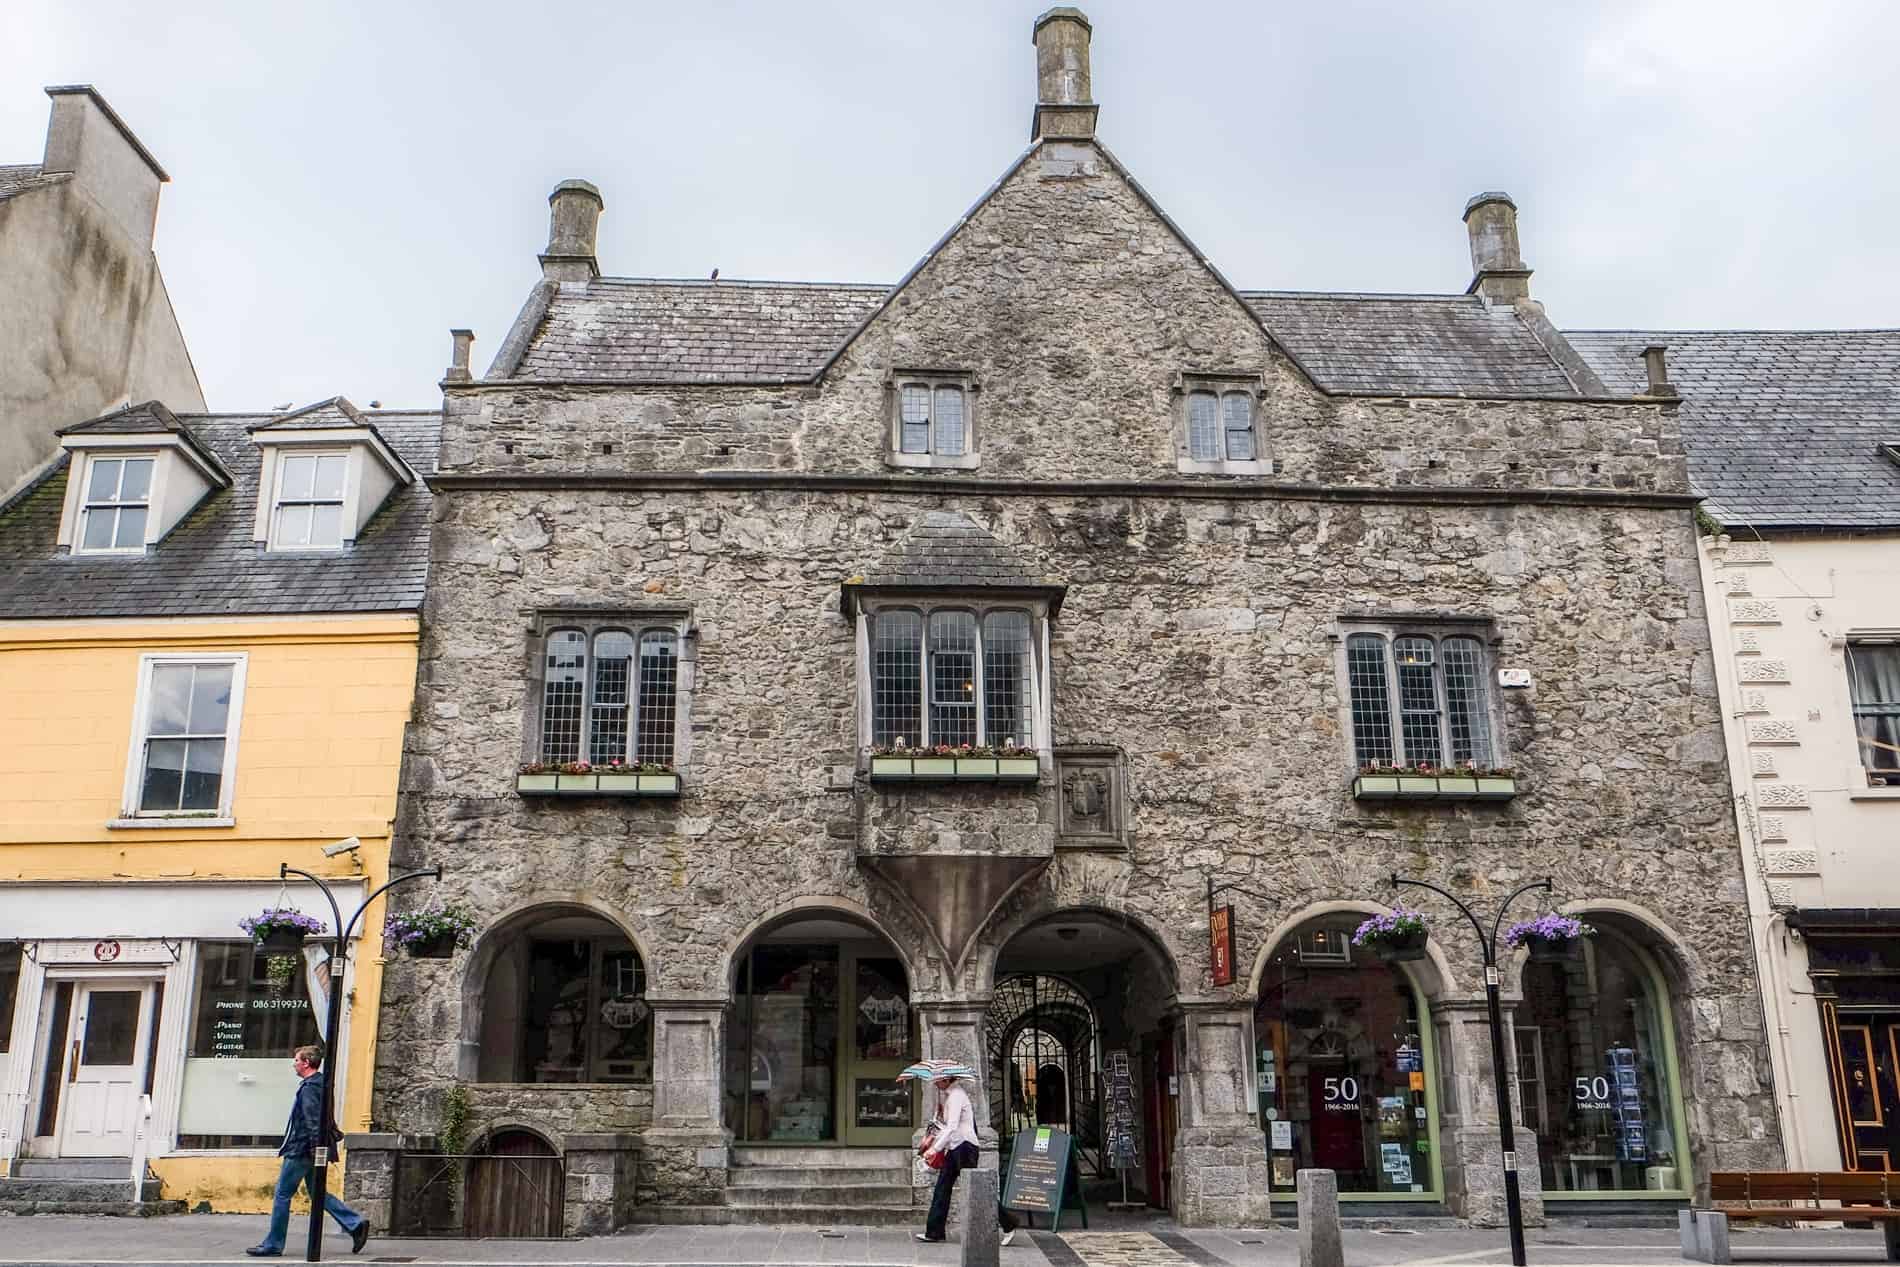 An old weathered stone house with triangular roof on a street in Kilkenny, wedged between more modern structures. 